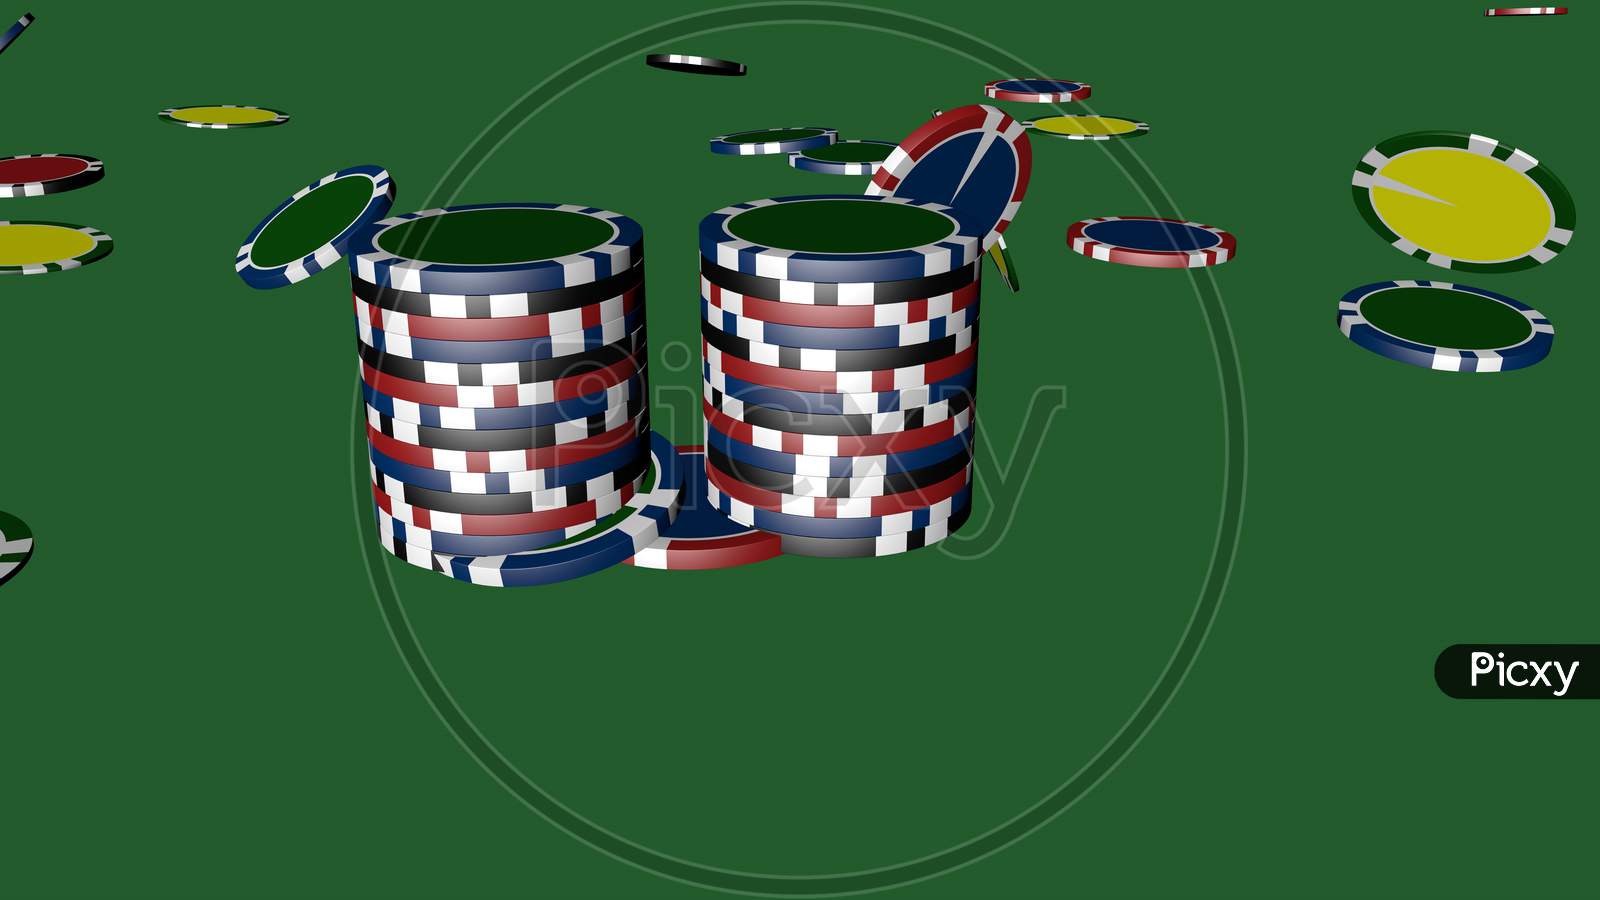 Set Of Poker Chips Of Different Colors Isolated On Green Background.